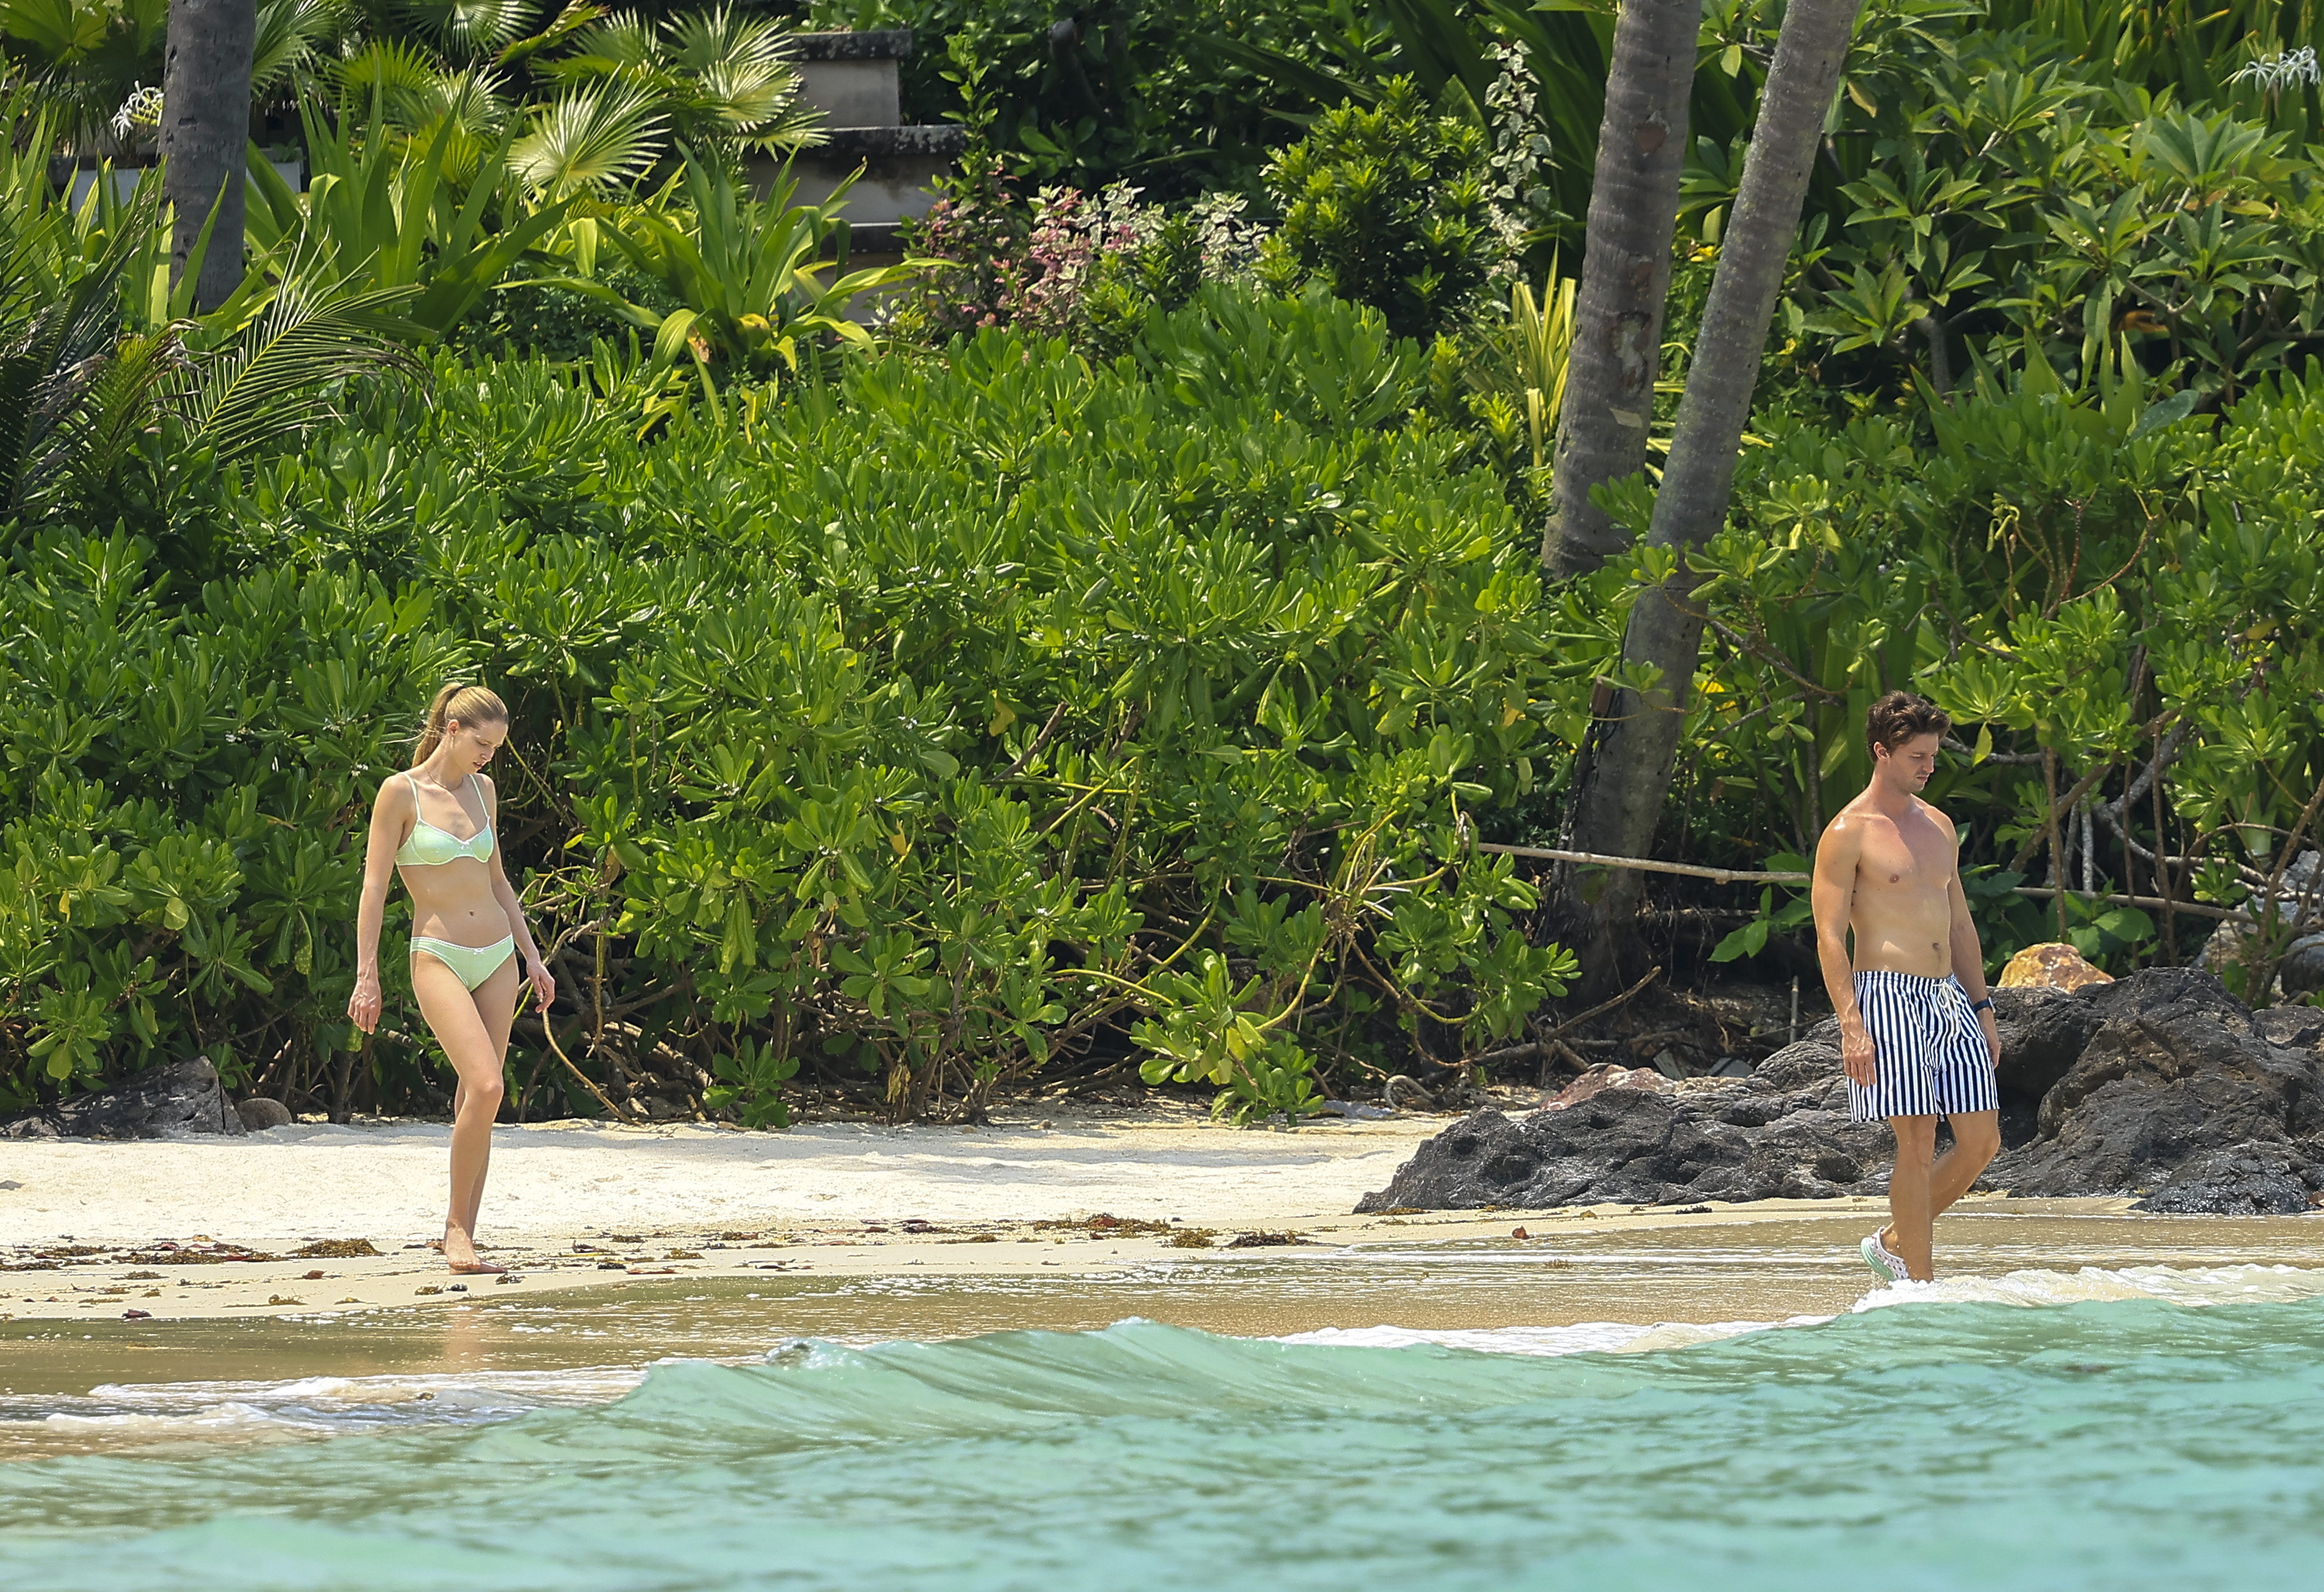 Patrick went shirtless, showing off his fit physique while he and his model girlfriend enjoyed the tropical paradise